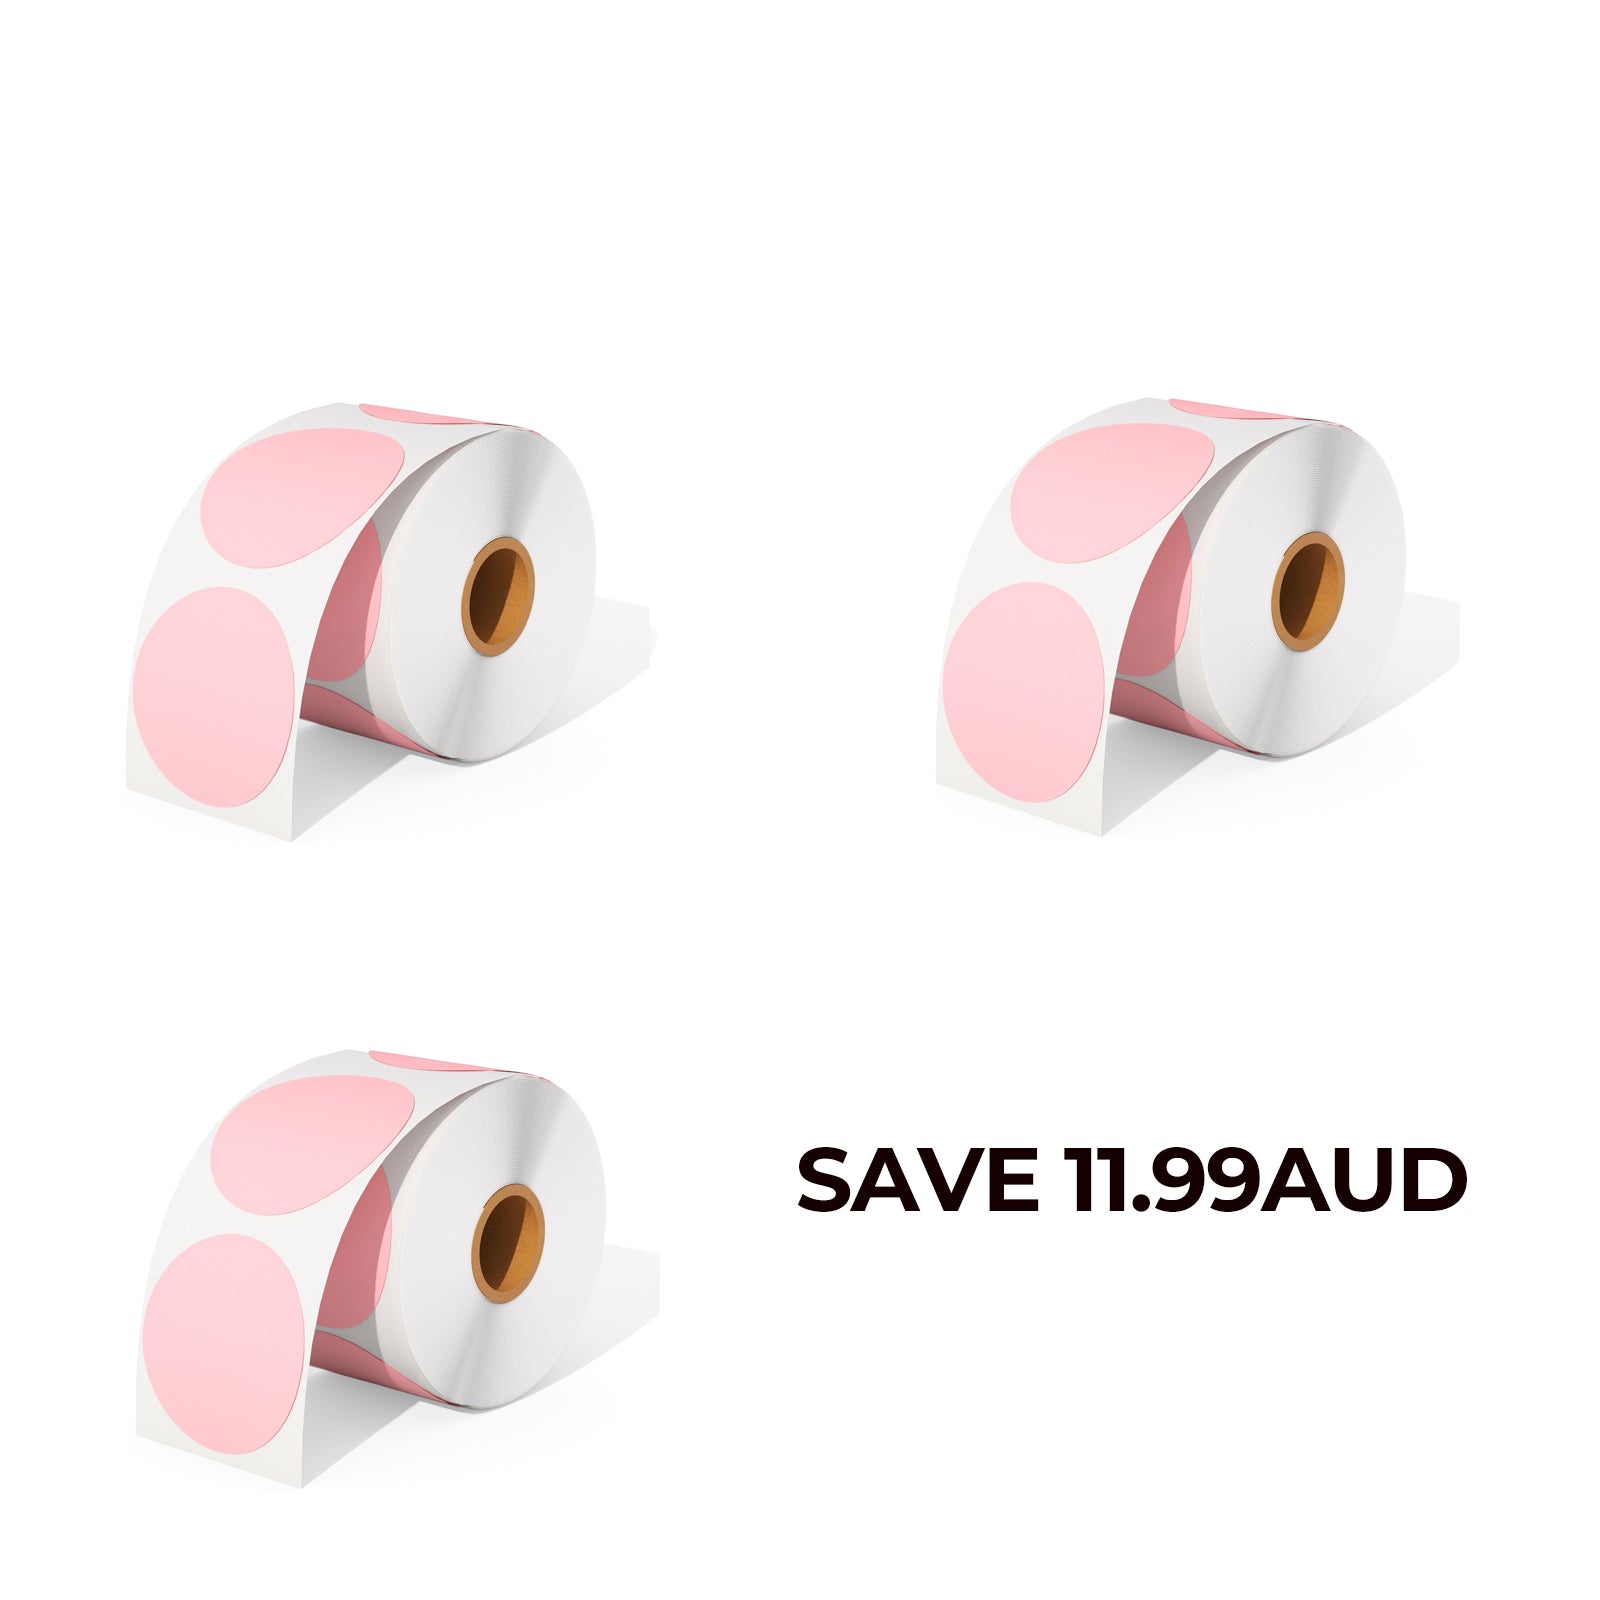 Save $11.99AUD on three rolls of pink thermal round labels.